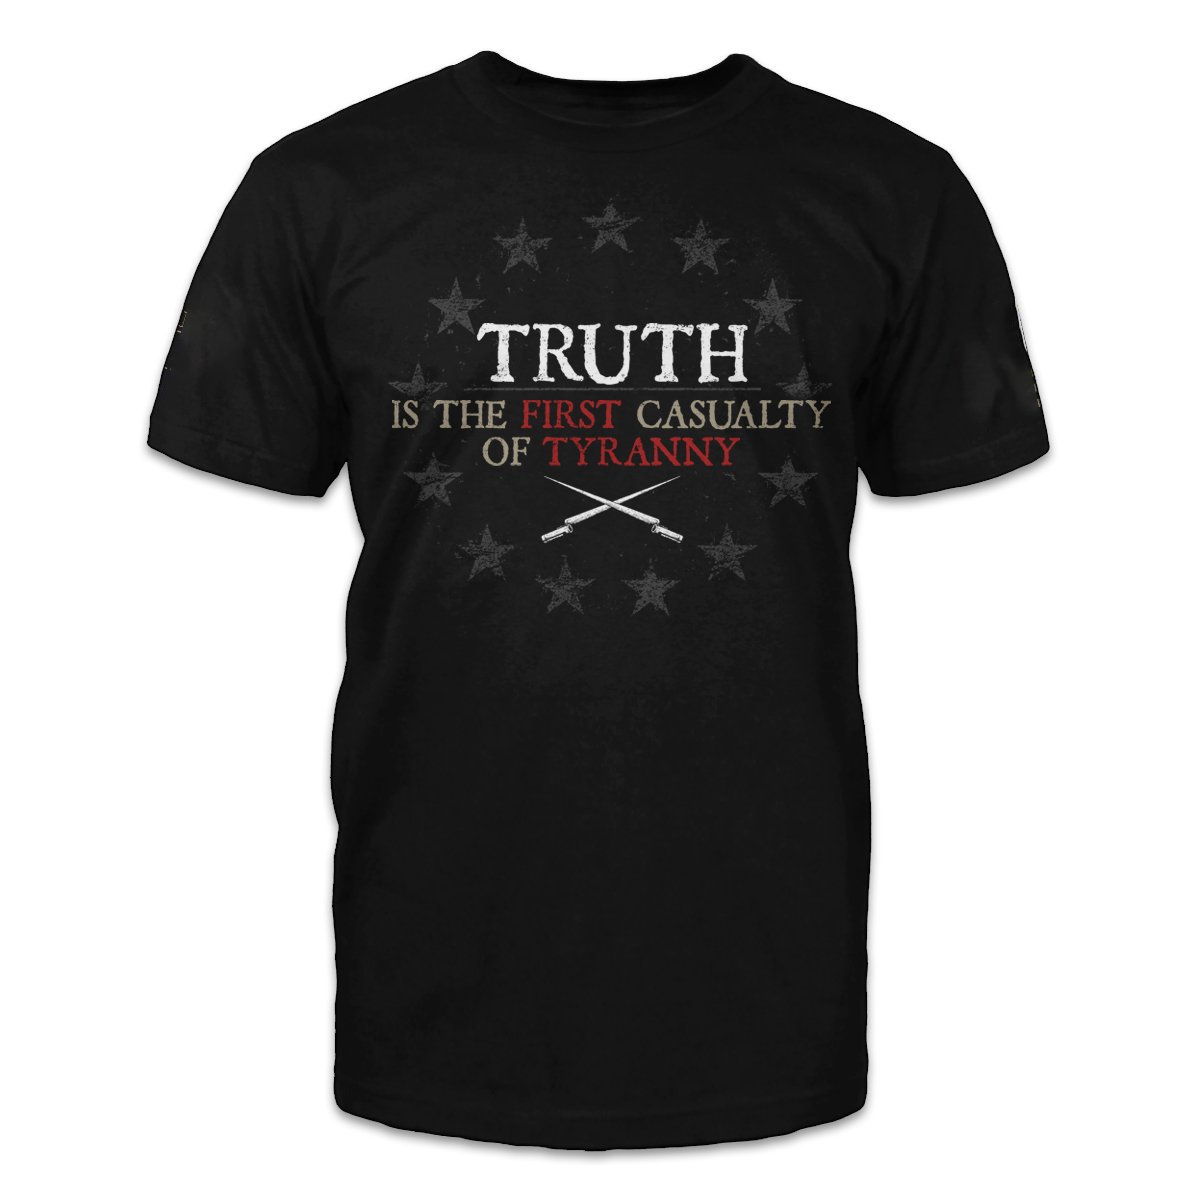 Veteran Shirt, Shirts With Sayings, Truth Is The First Casualty Of Tyranny T-Shirt KM1008